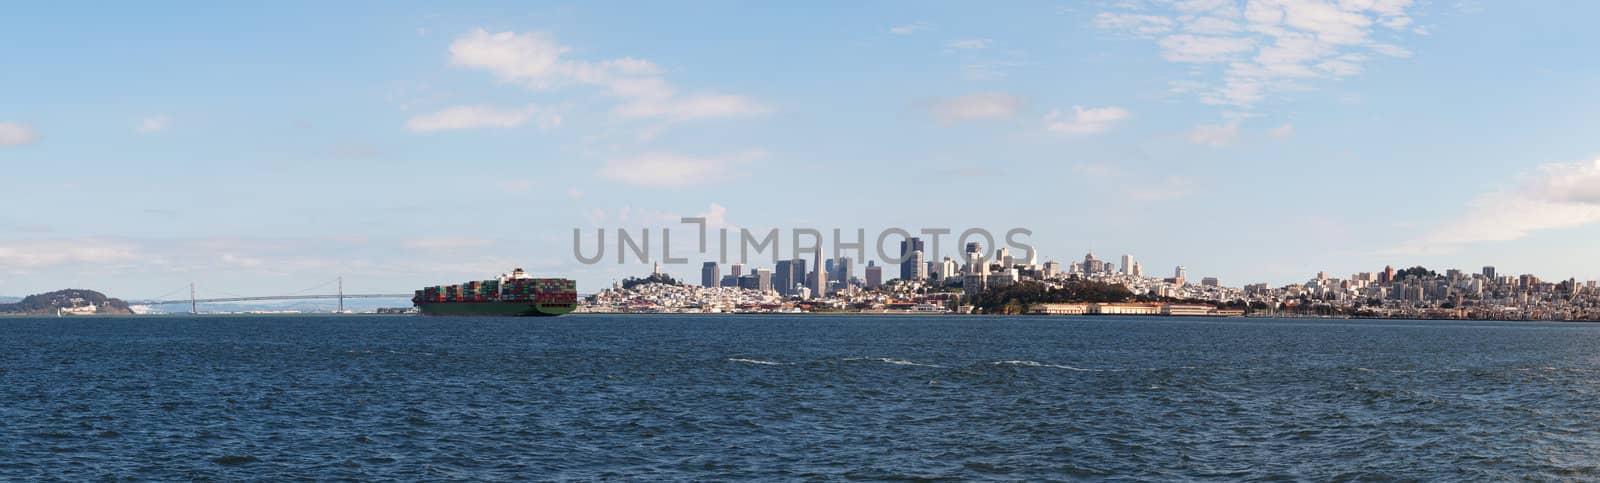 Downtown of San Francisco as seen from the bay by AndreyKr